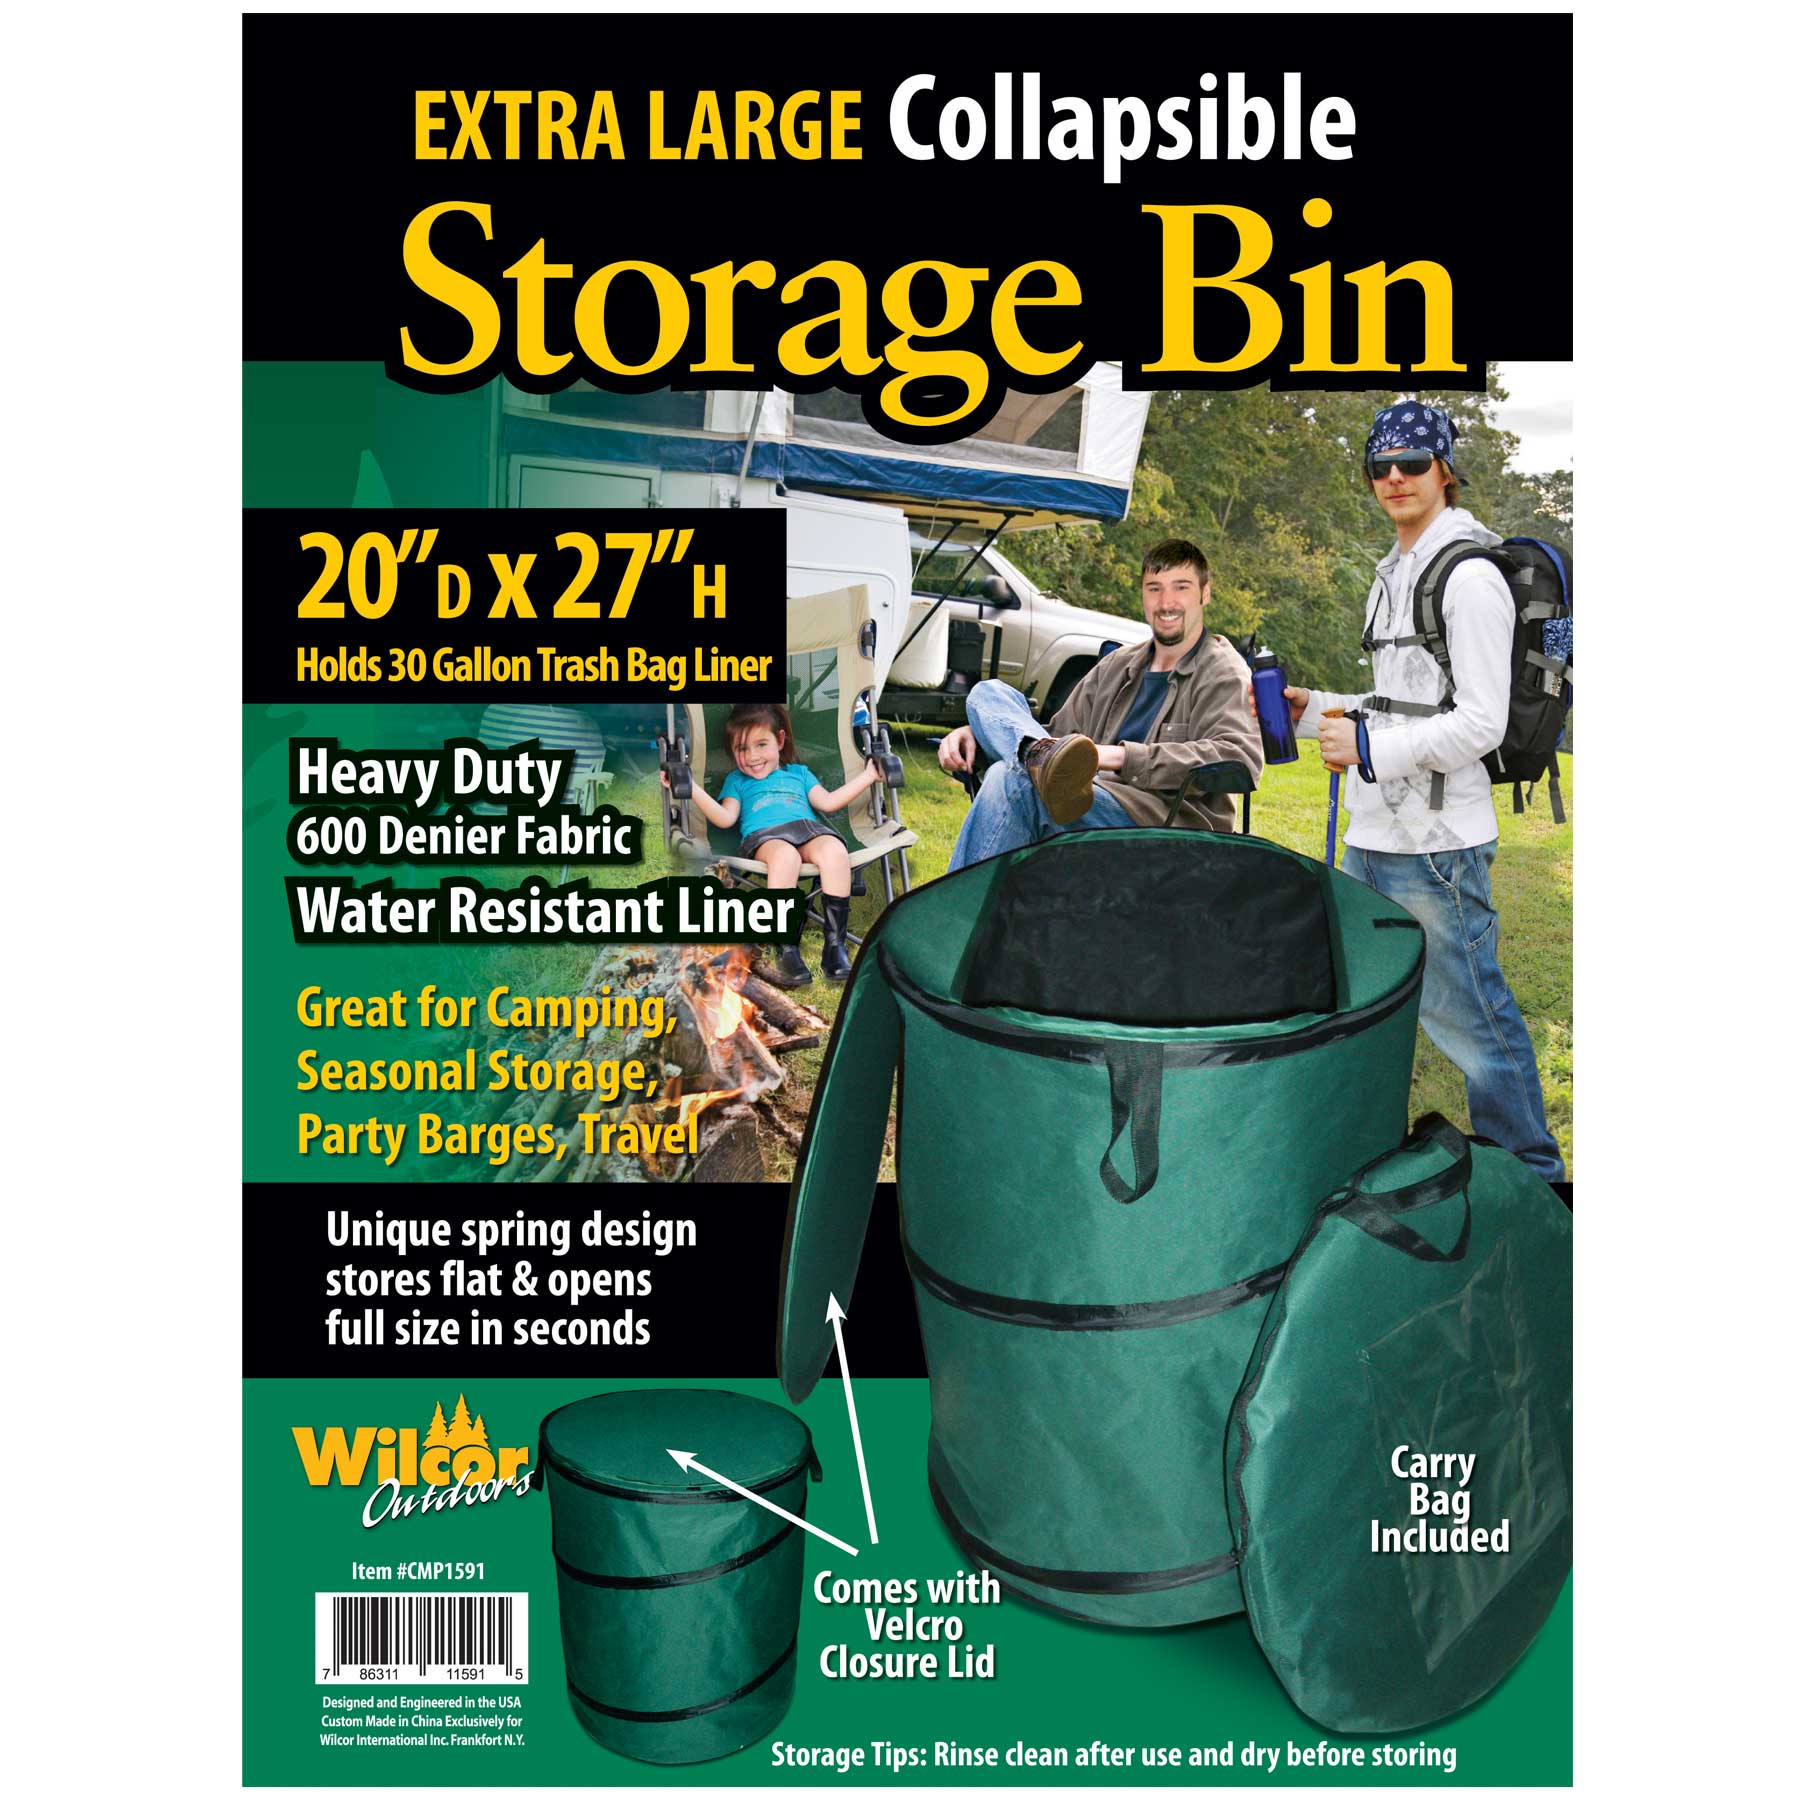 https://wilcor.net/productimages/cmp1591_xlarge_collapsible_storage_bin_green_tag.jpg